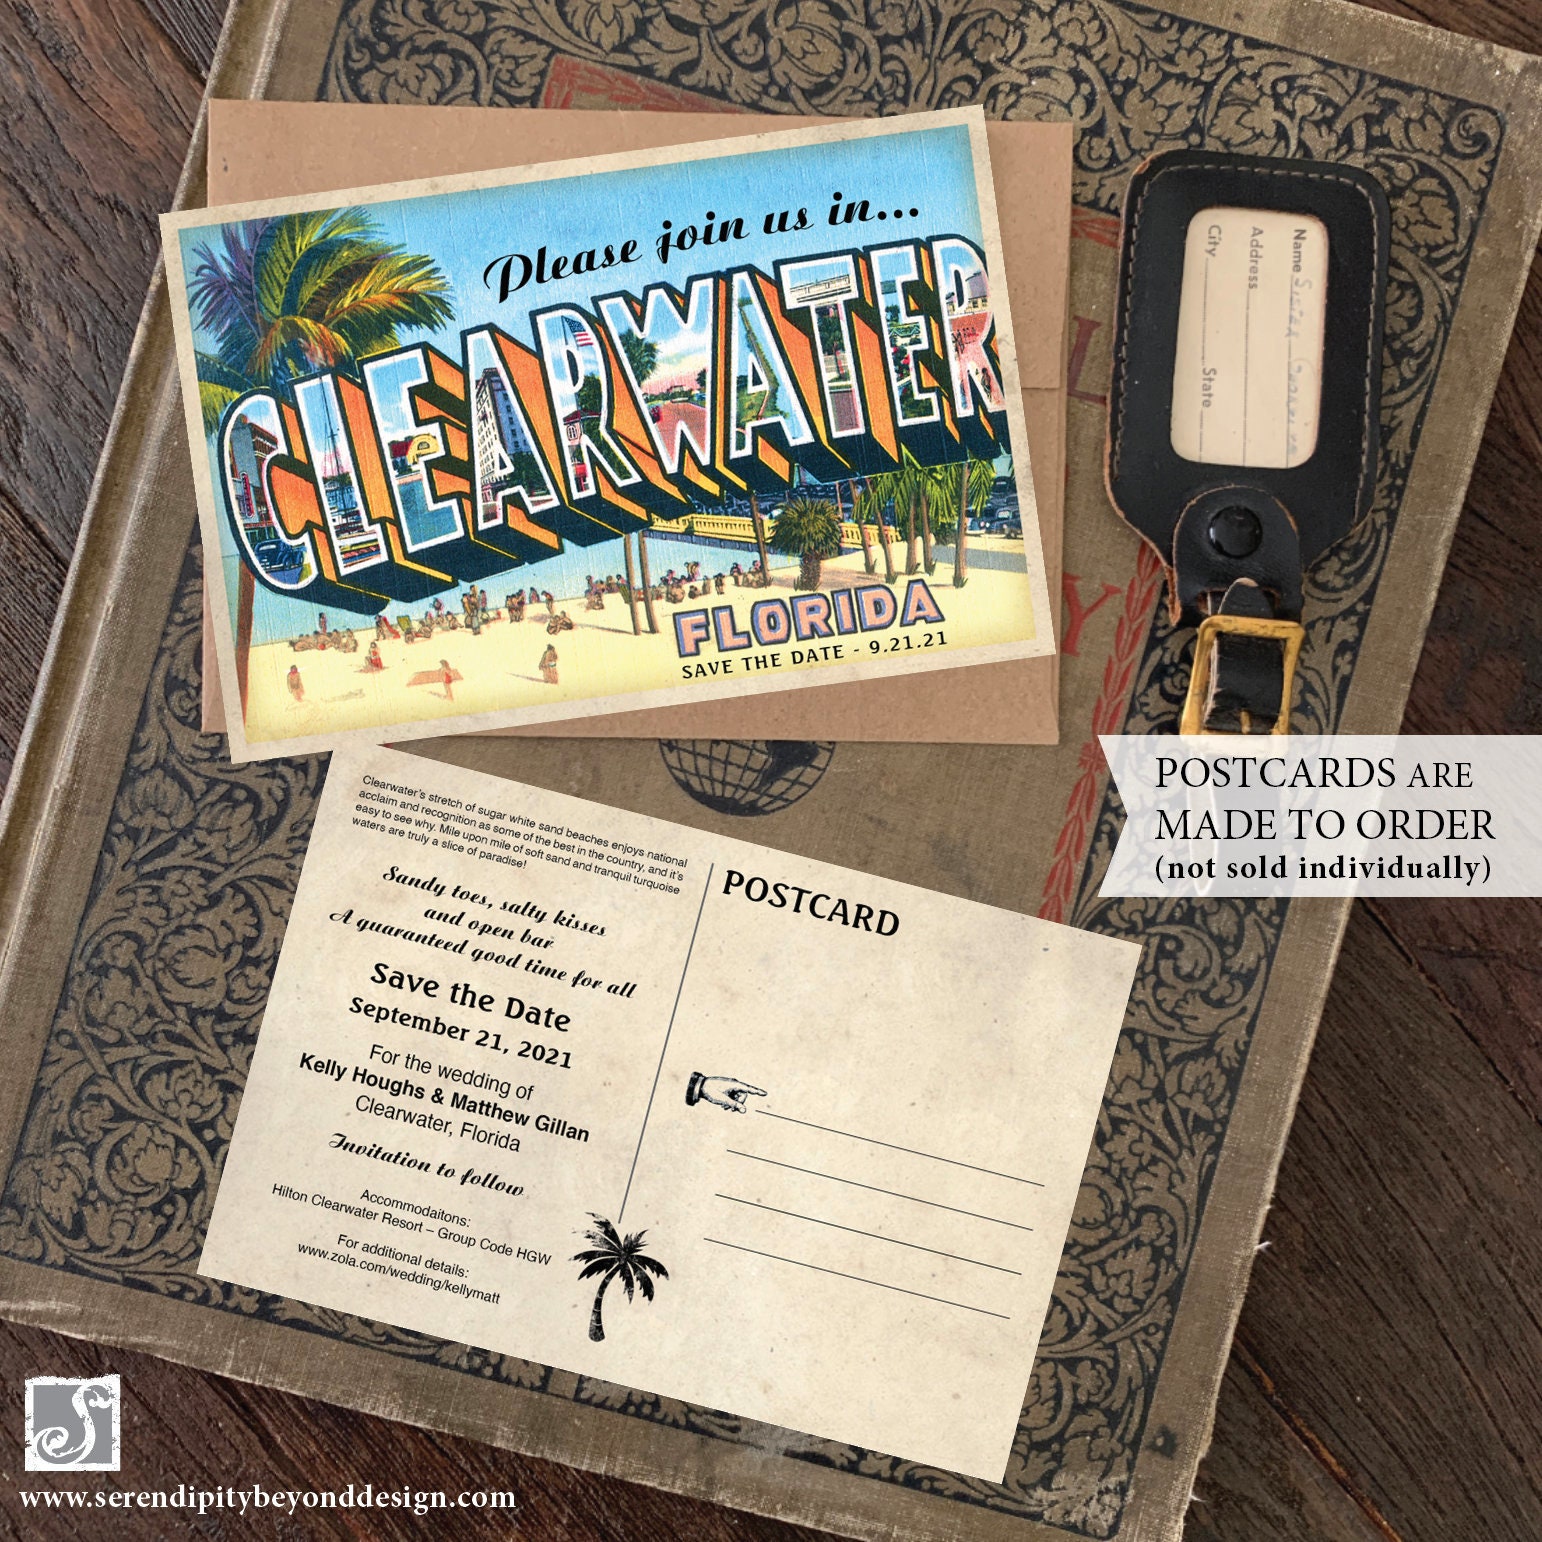 Save the Date Clearwater Florida Vintage Large Letter